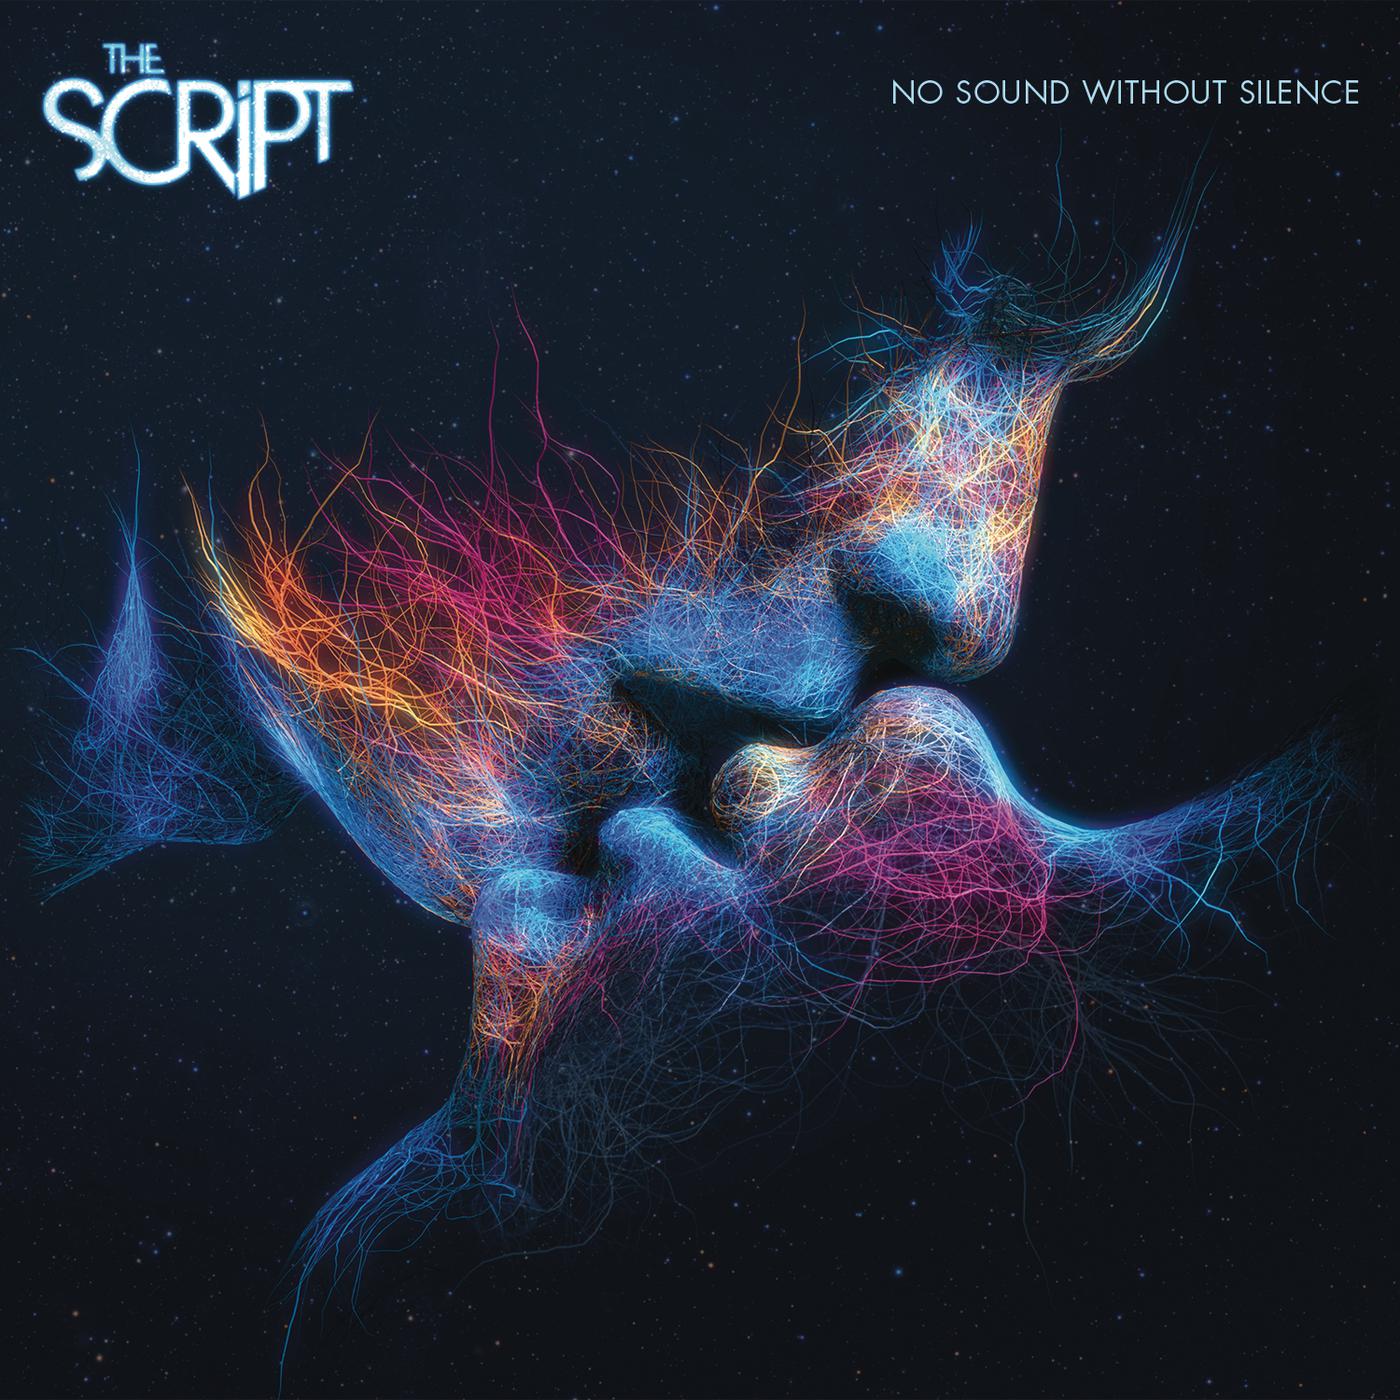 No Good in Goodbye歌词 歌手The Script-专辑No Sound Without Silence-单曲《No Good in Goodbye》LRC歌词下载